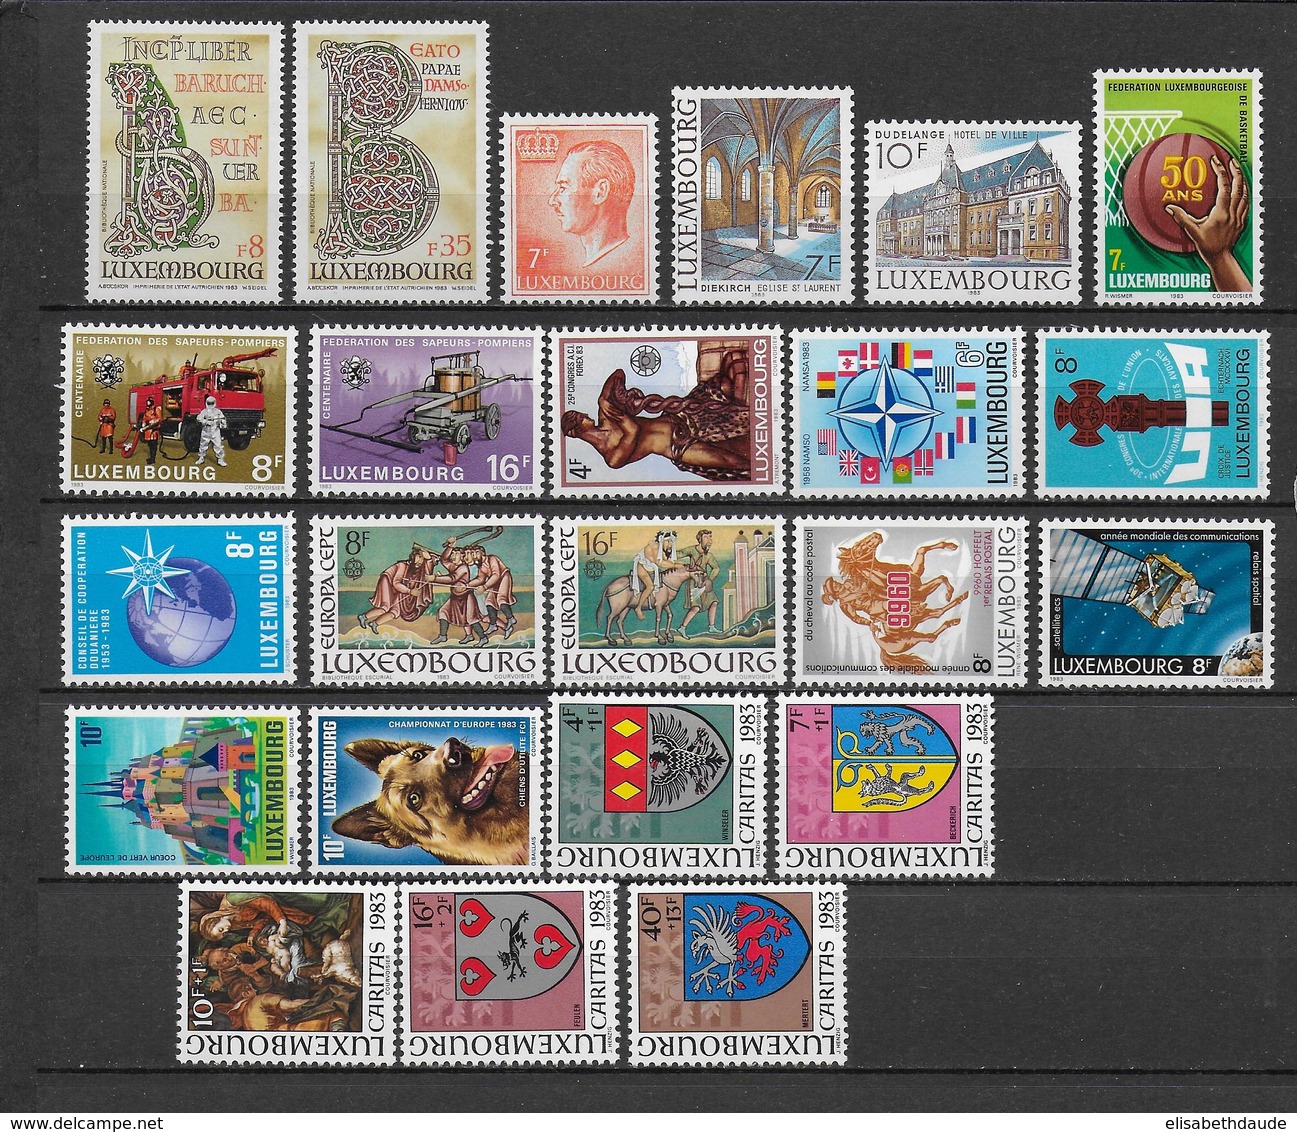 LUXEMBOURG - ANNEE COMPLETE 1983 ** MNH - - Annate Complete